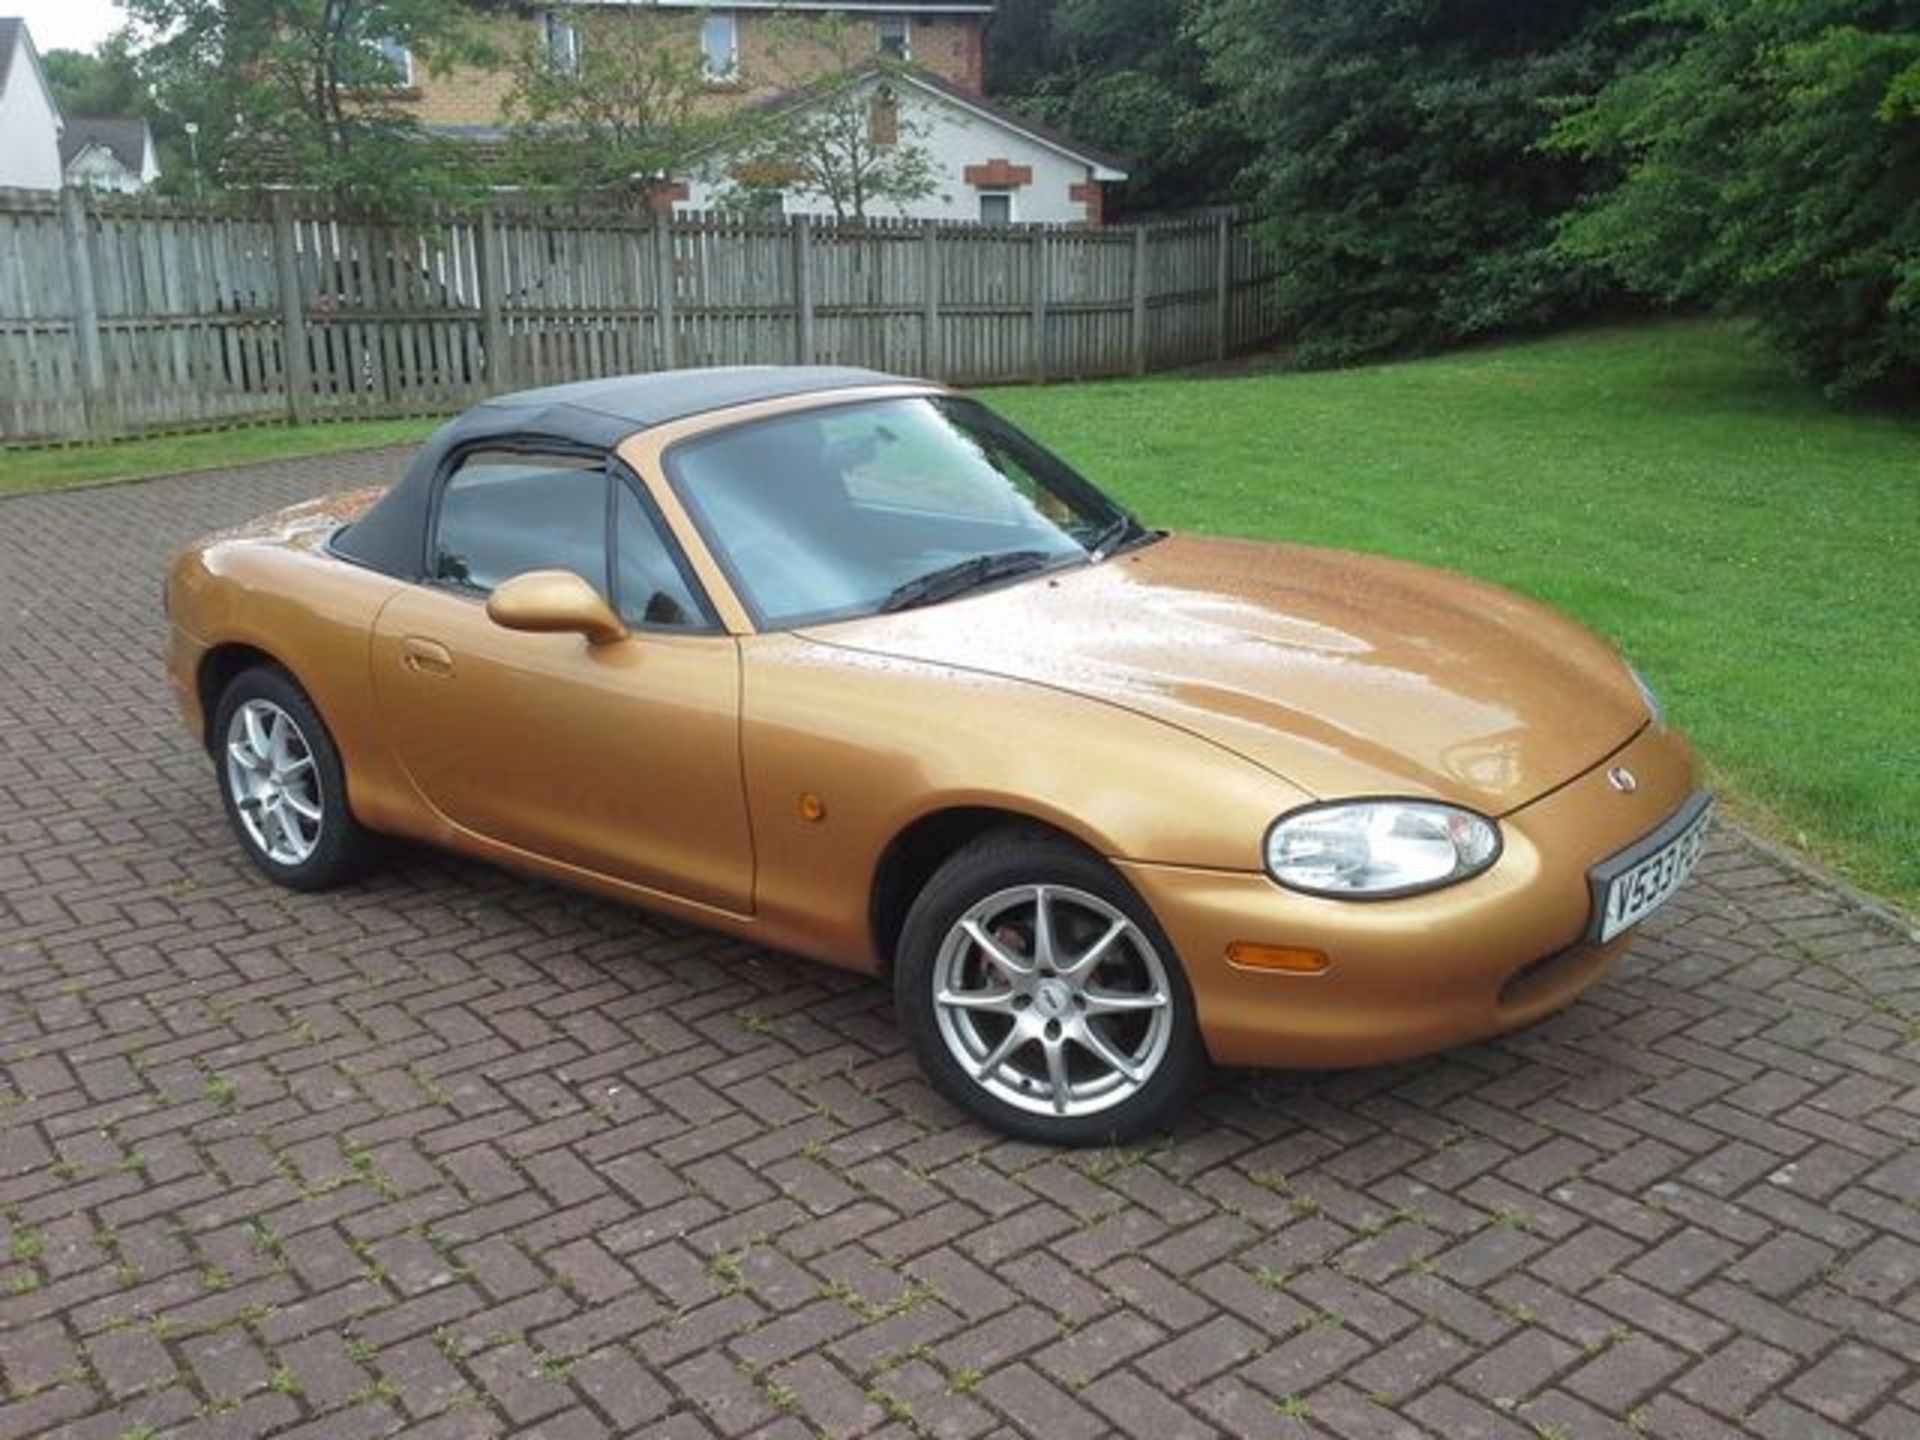 MAZDA, MX-5 - 1598cc, Chassis number JMZNB186200134536 - finding an early production MK II in this